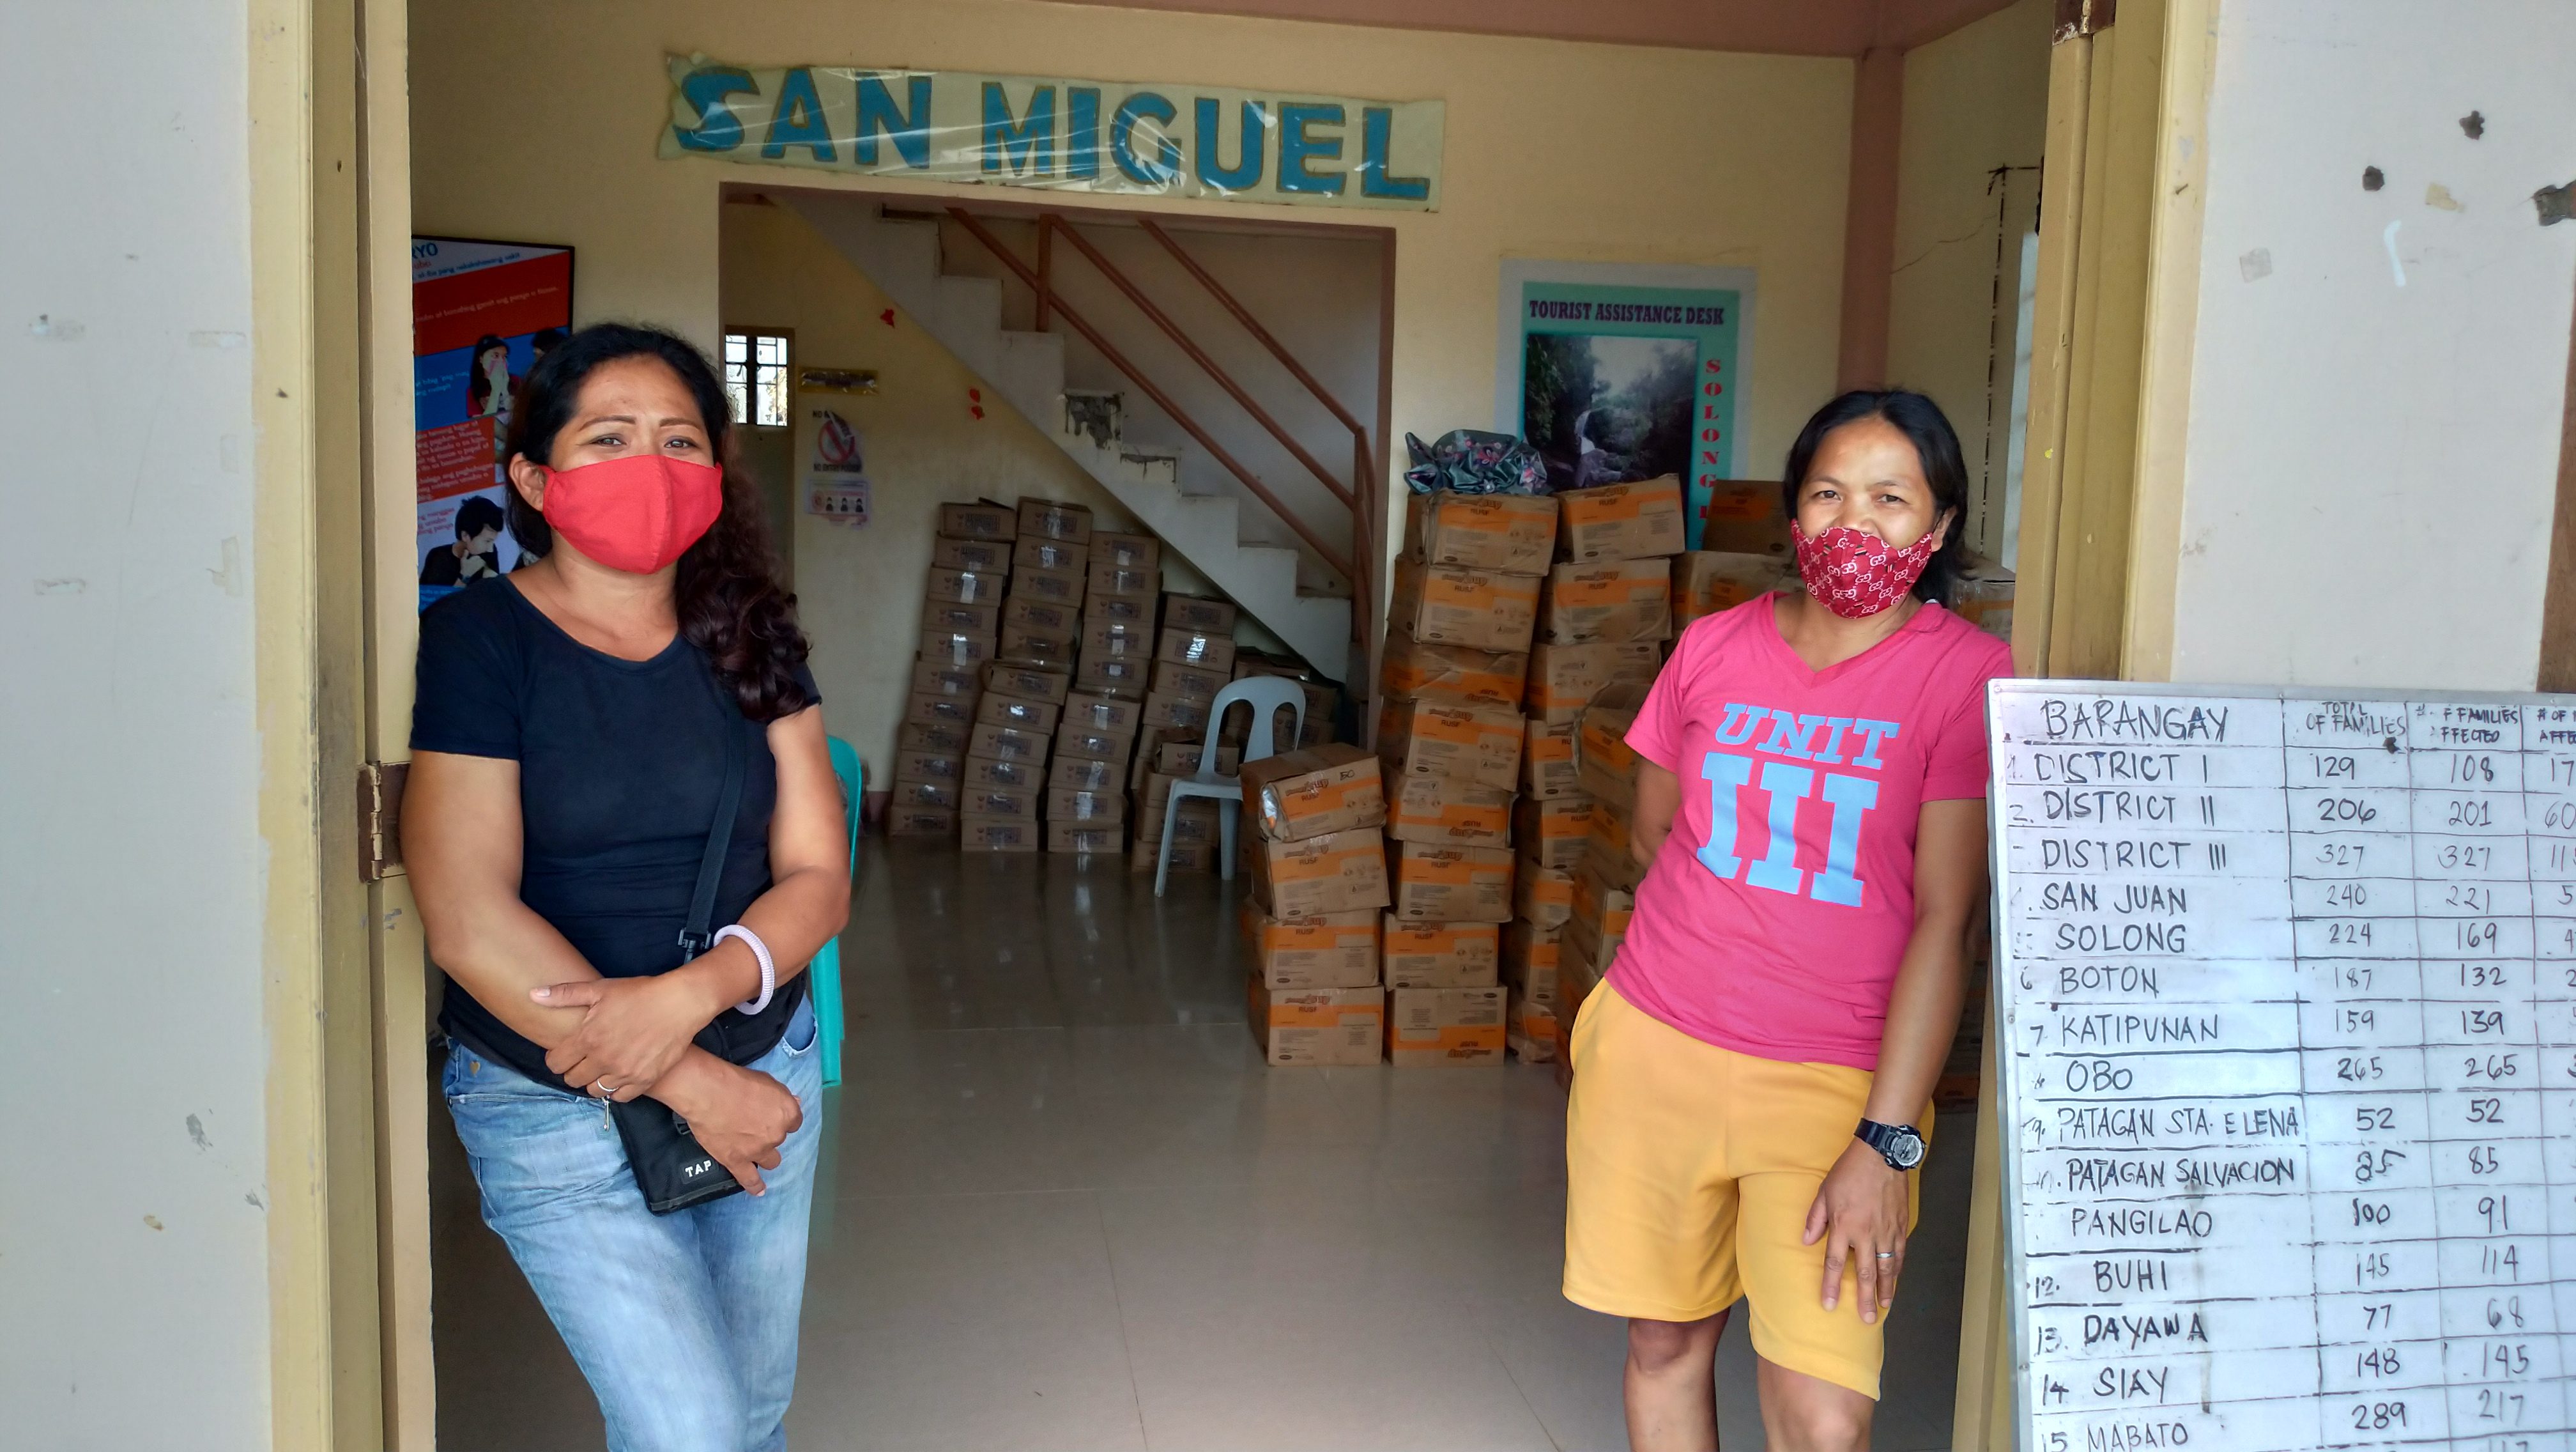 Meet the people who take care of typhoon evacuees in Bicol